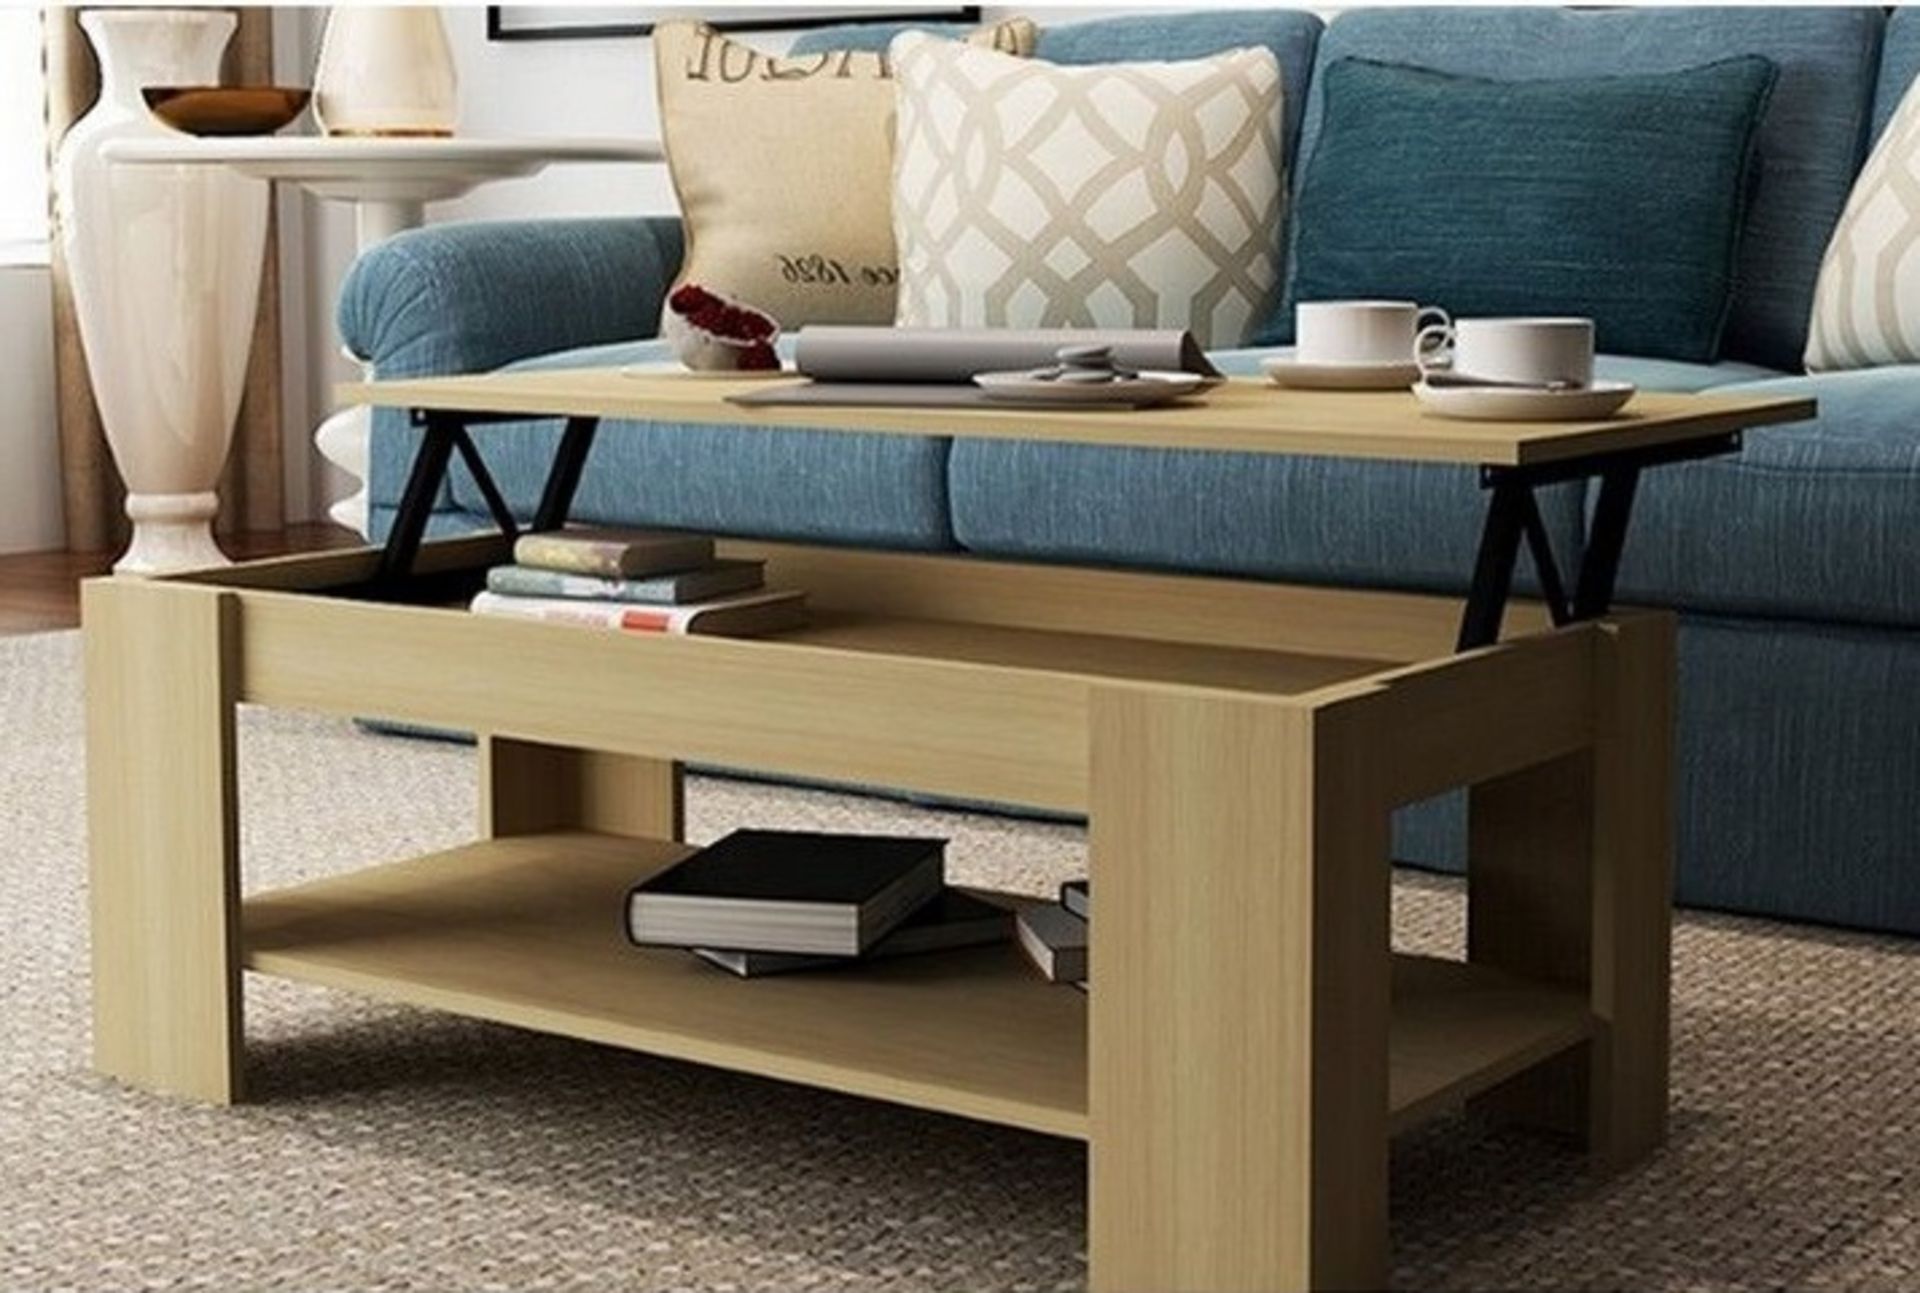 1 x "Caspian" Lift Up Top Coffee Table with Storage - Colour: OAK - Sleek Modern Design - - Image 2 of 2